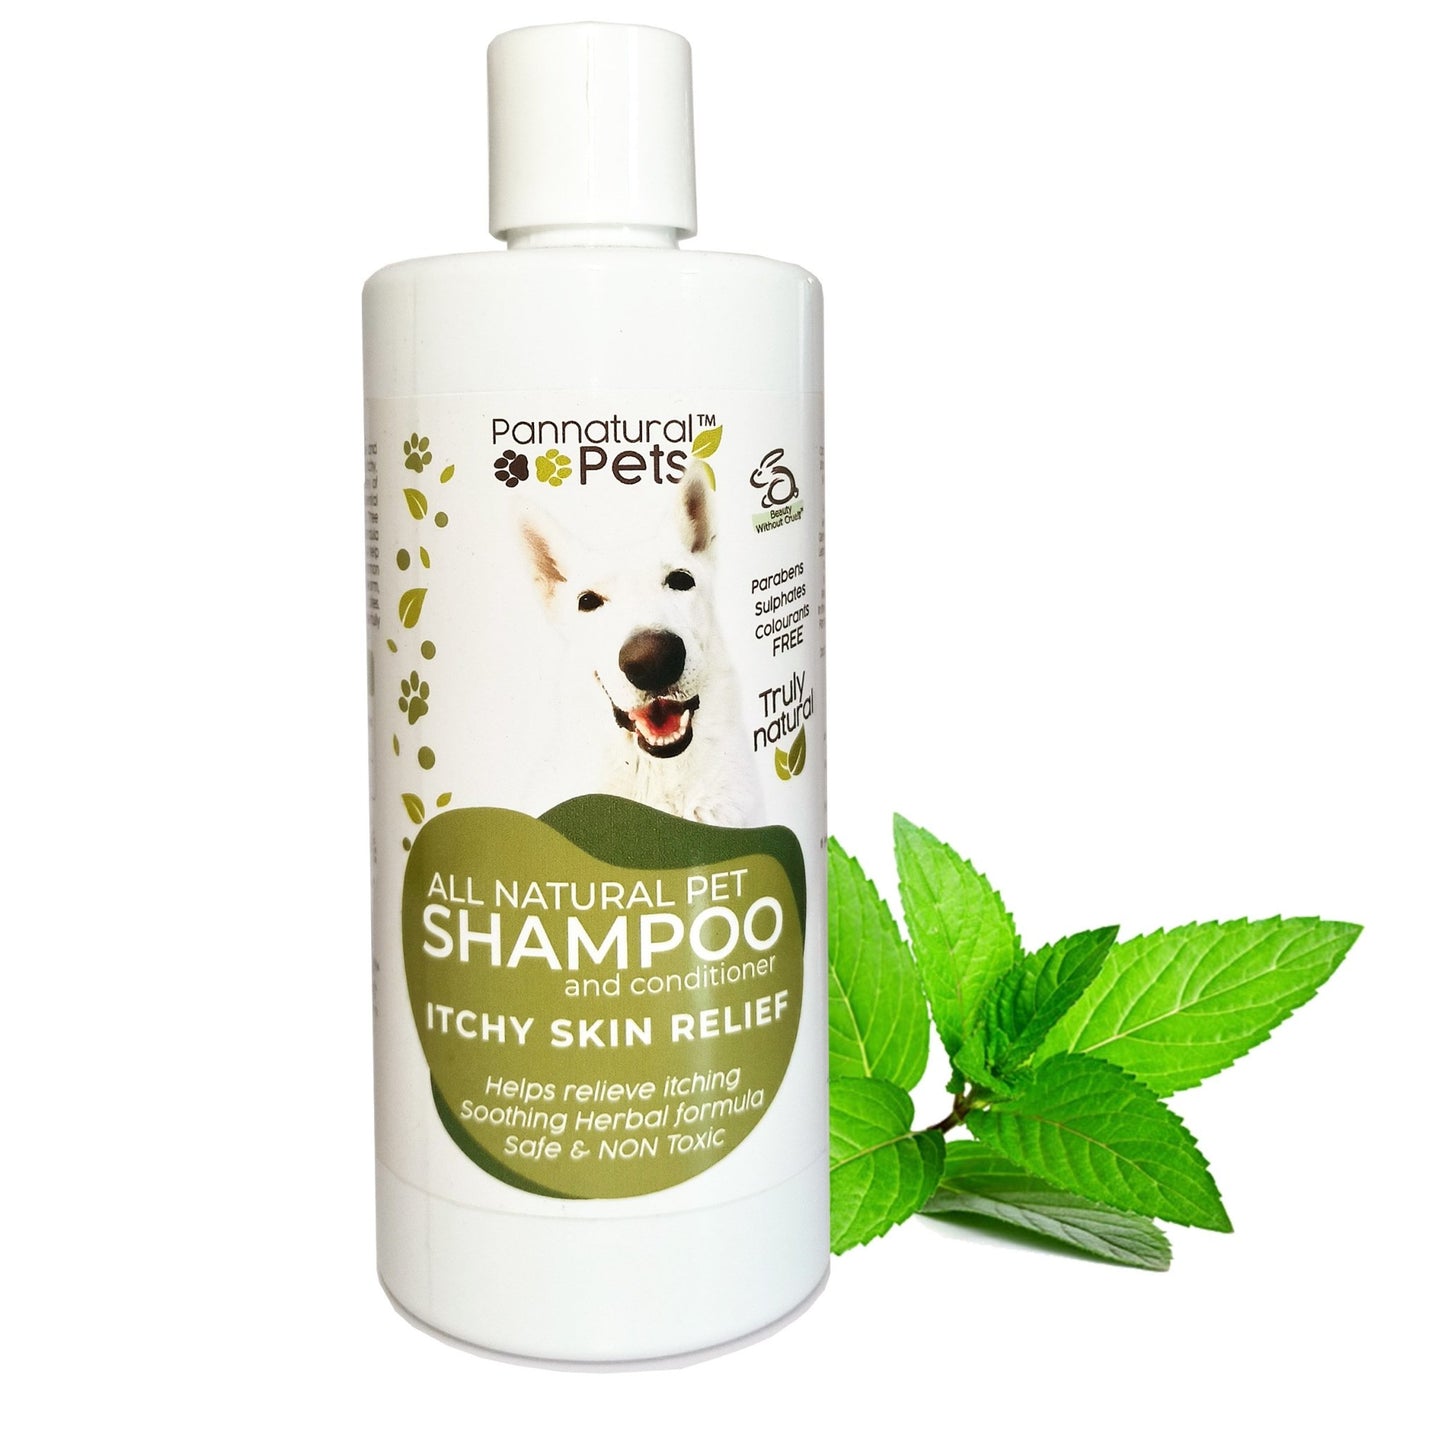 Pannatural Pets Itchy Skin Relief Shampoo - Skin and Coat Care